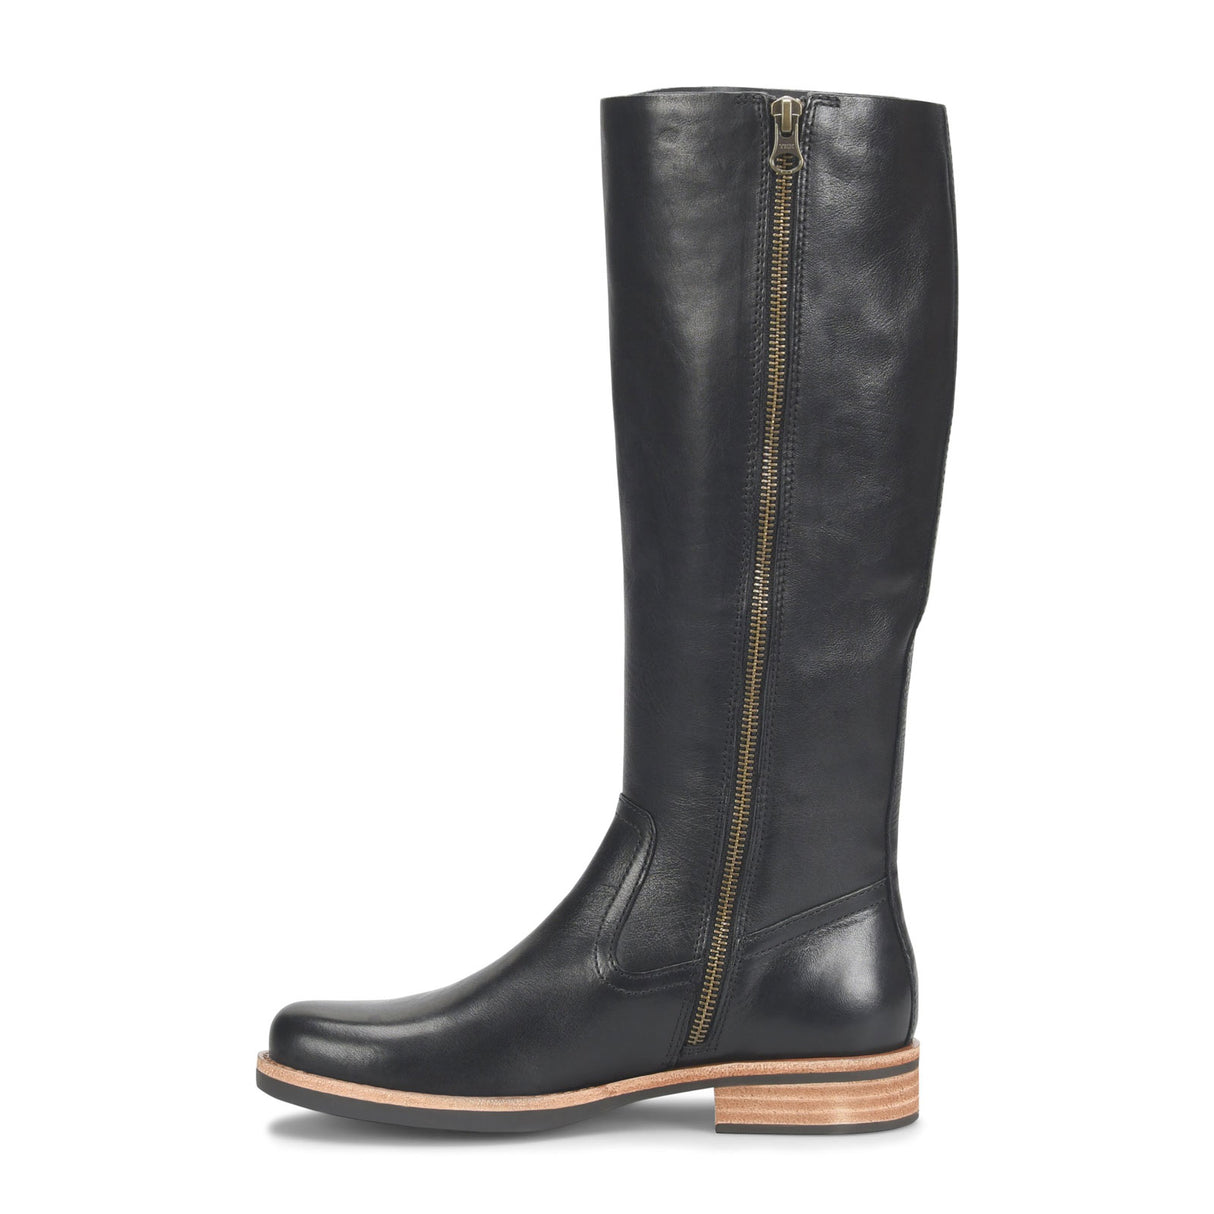 Kork-Ease Sydney Tall Boot (Women) - Black Boots - Fashion - The Heel Shoe Fitters